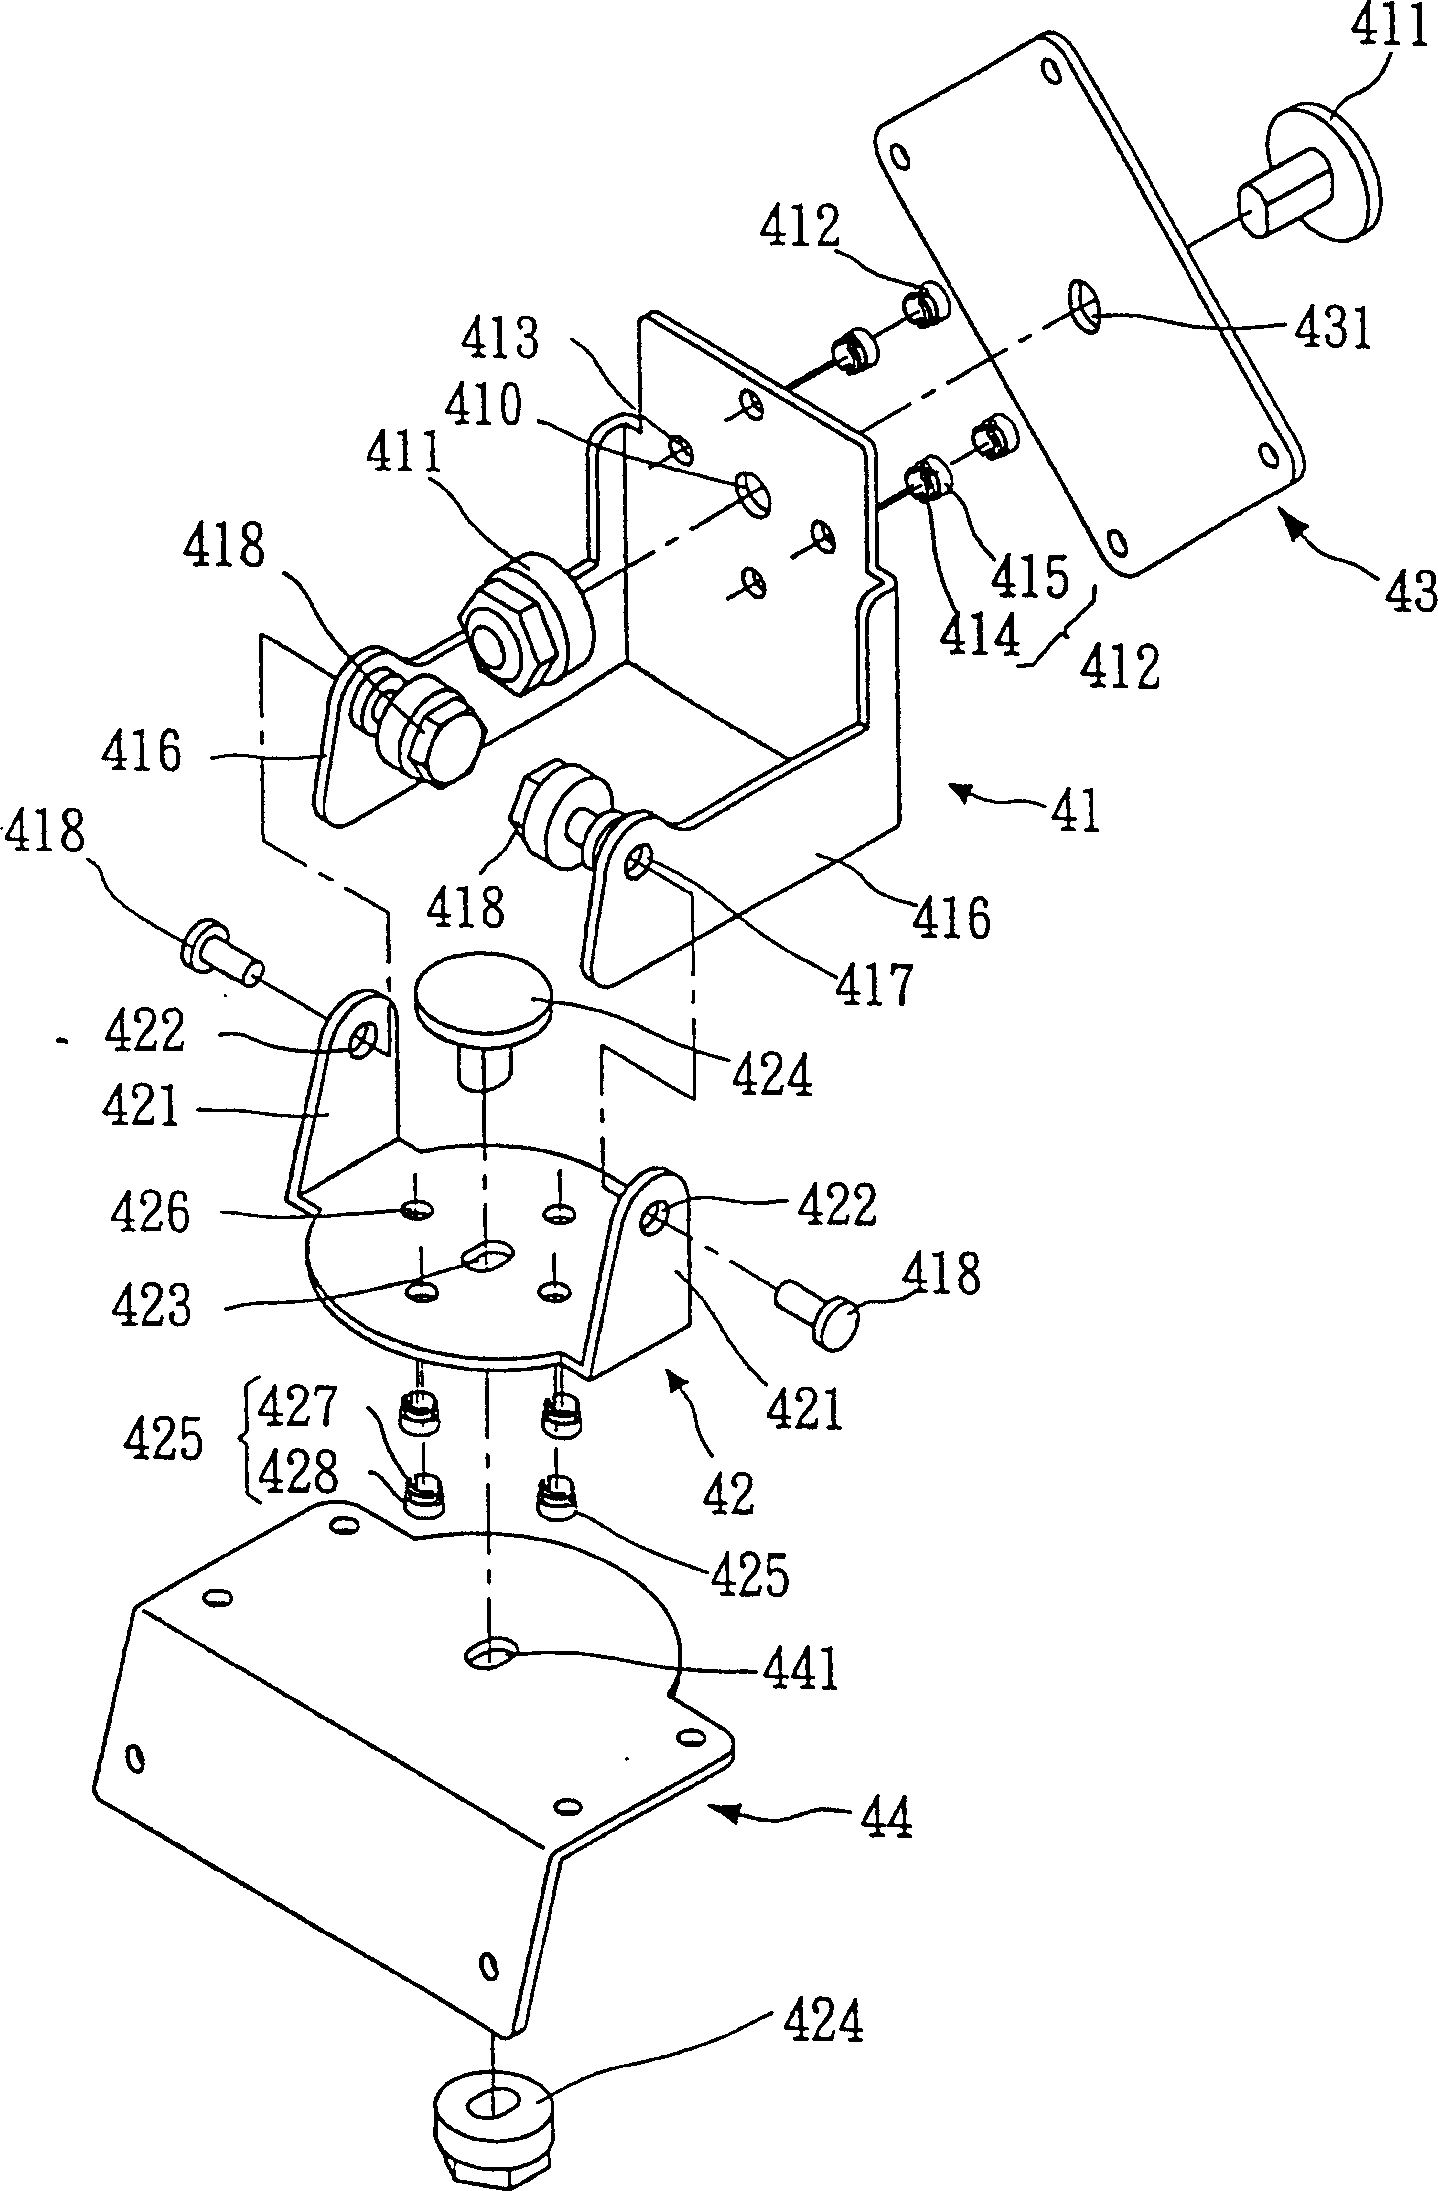 Three-axis pivot structure